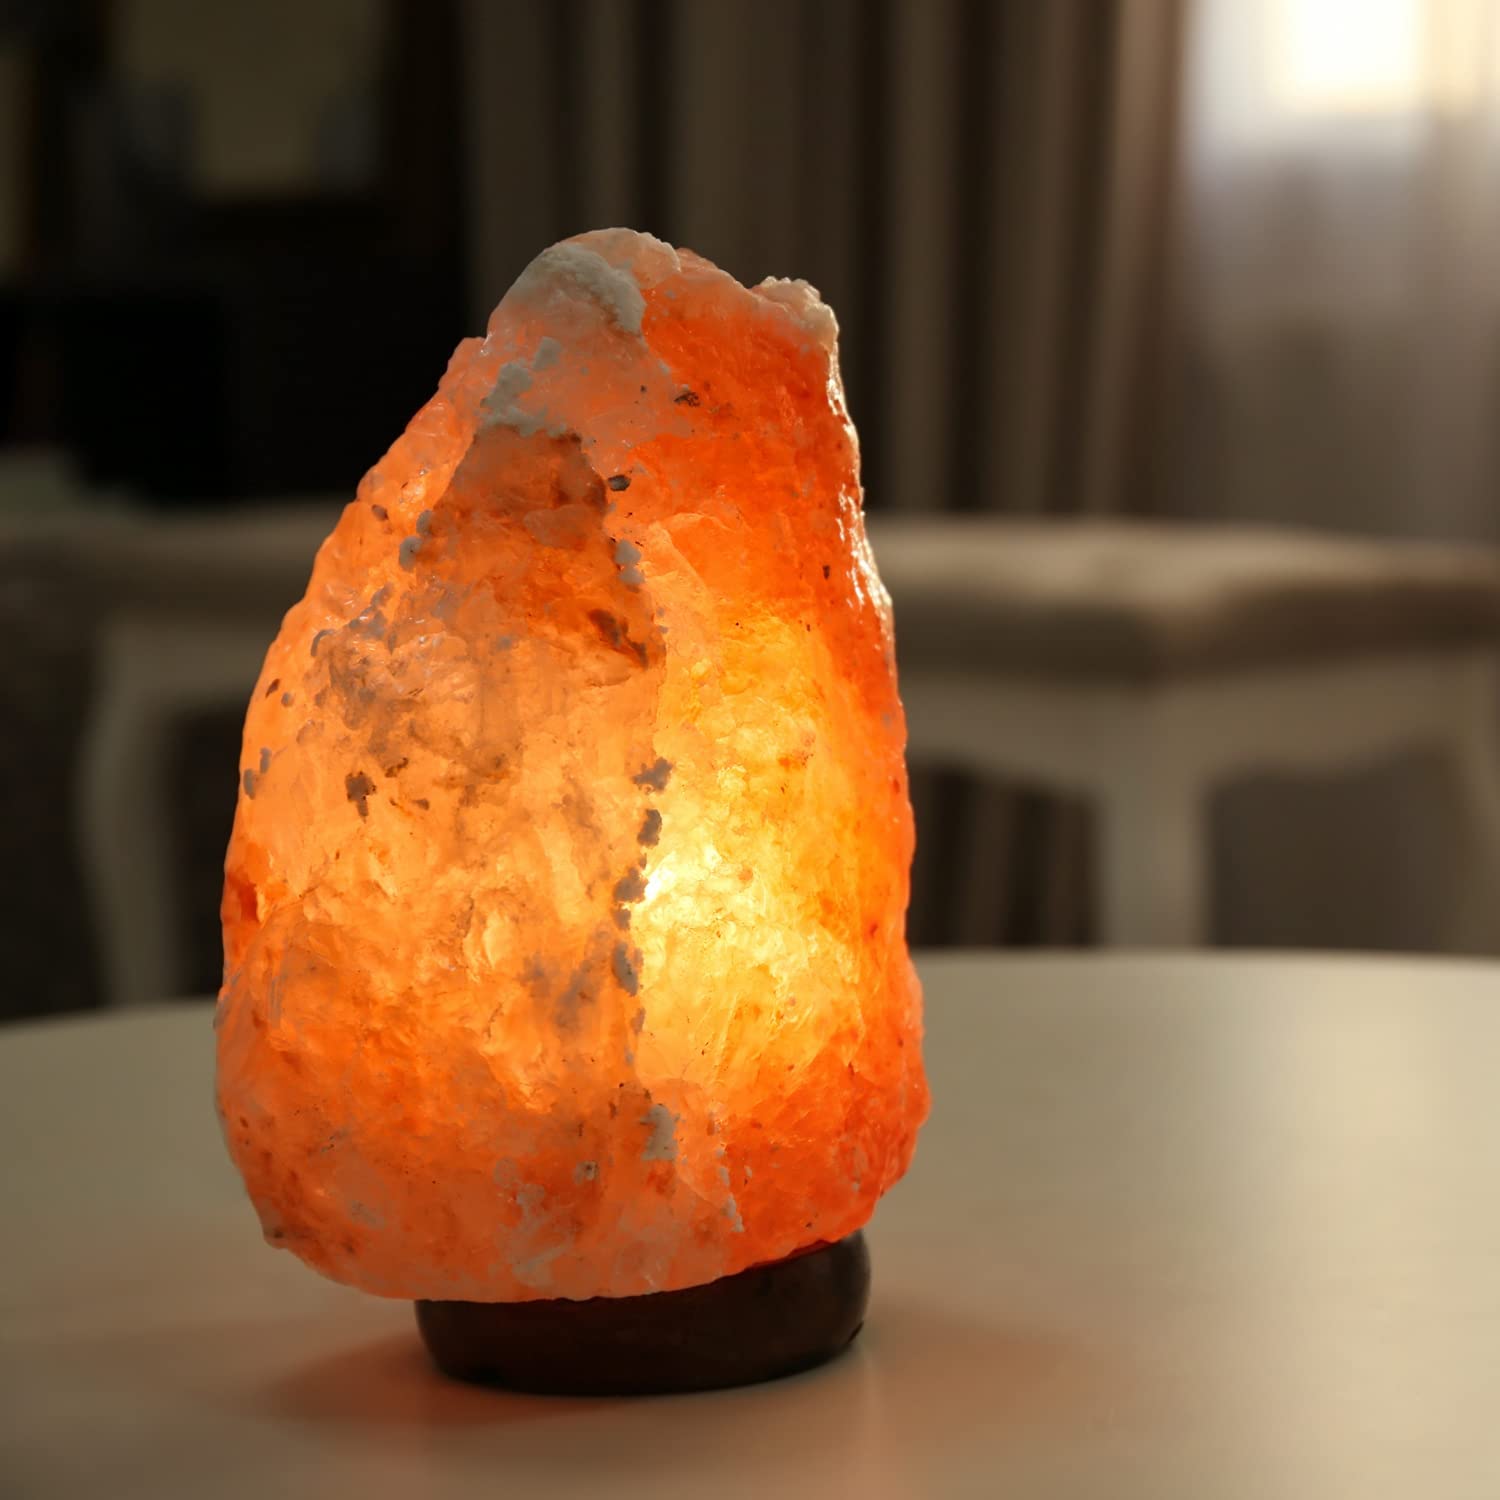 7 Inch Himalayan with Dimmer Cord – Night Light Natural Crystal Classic Base Authentic from Pakistan - Spantik's Premium Quality Himalayan Salt Products